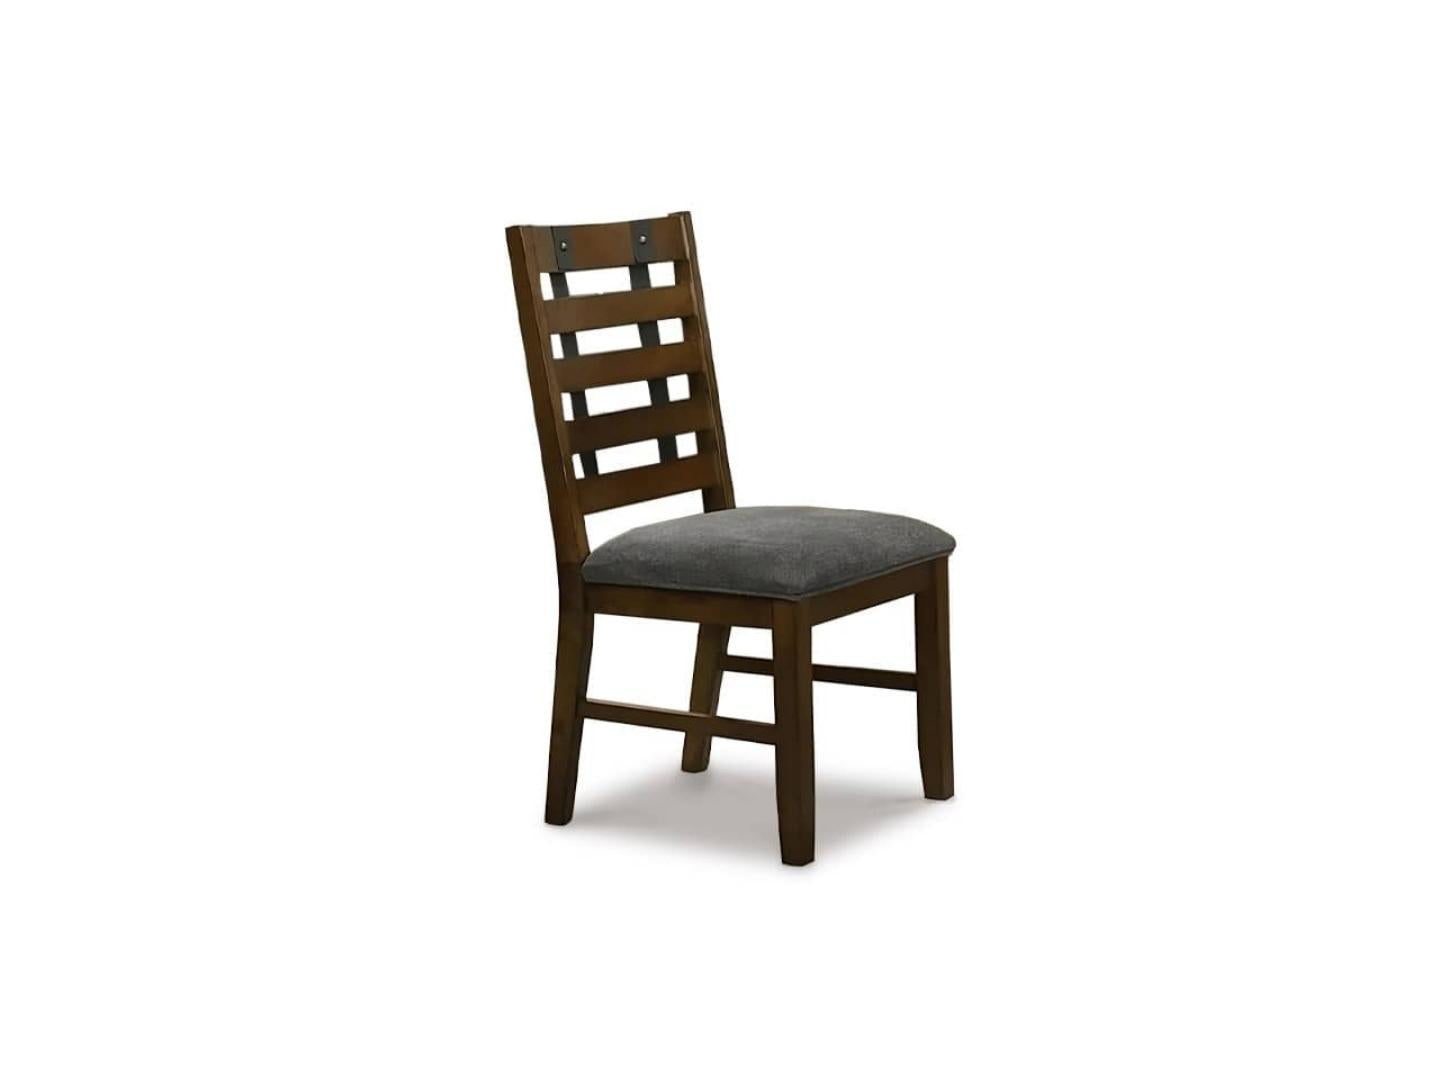 Thronos solid wood dining chair - Lux Furniture